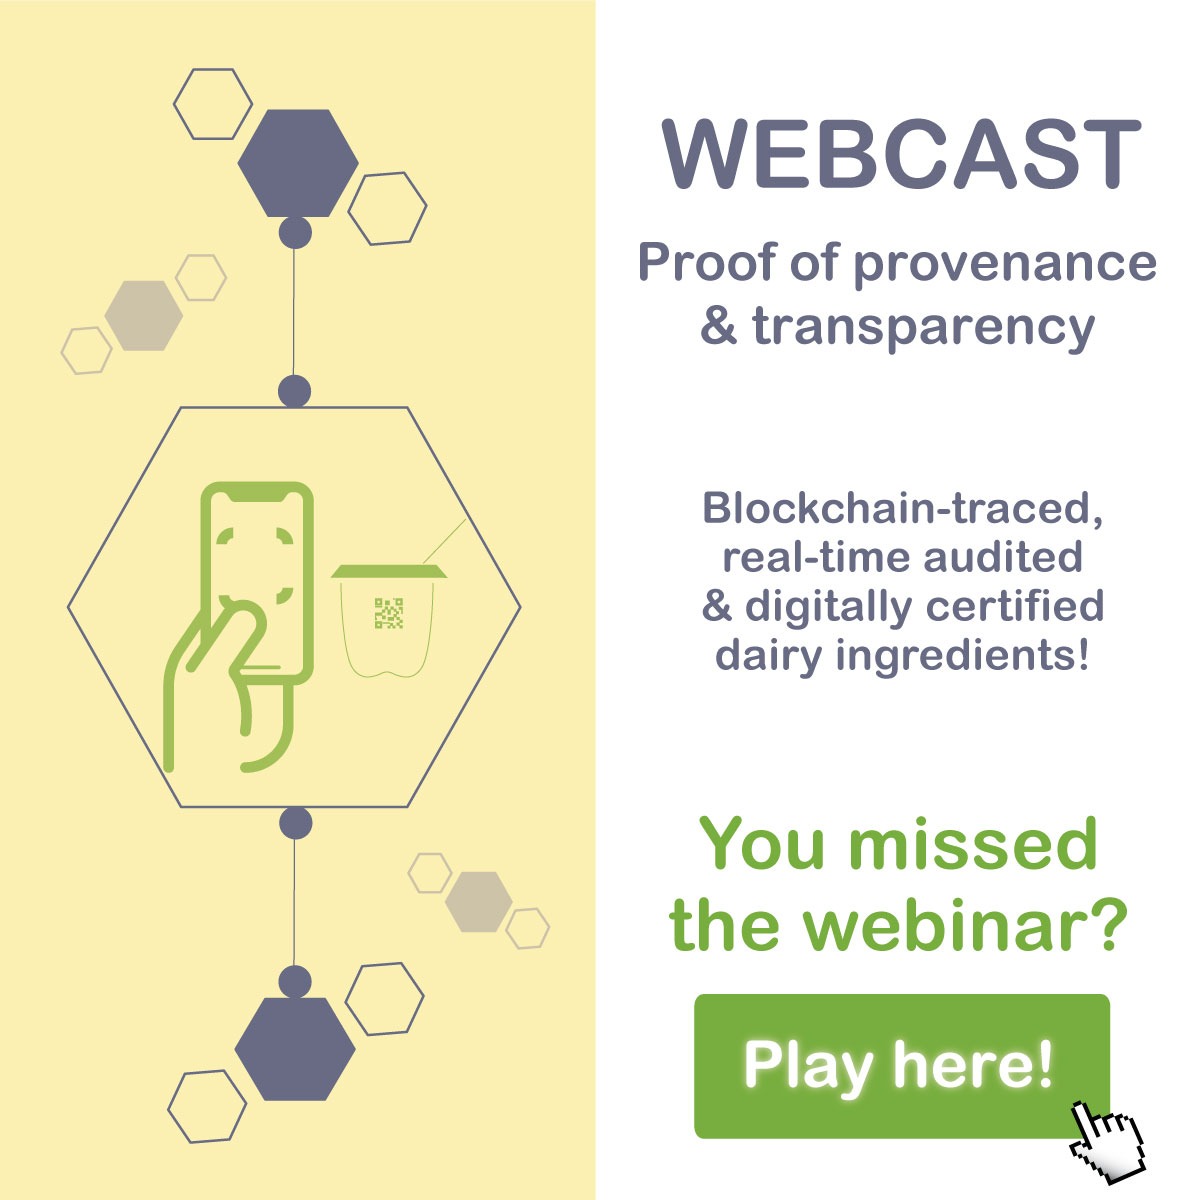 webcast transparency proof of provenance dairy products digitally certified blockchain real time audited